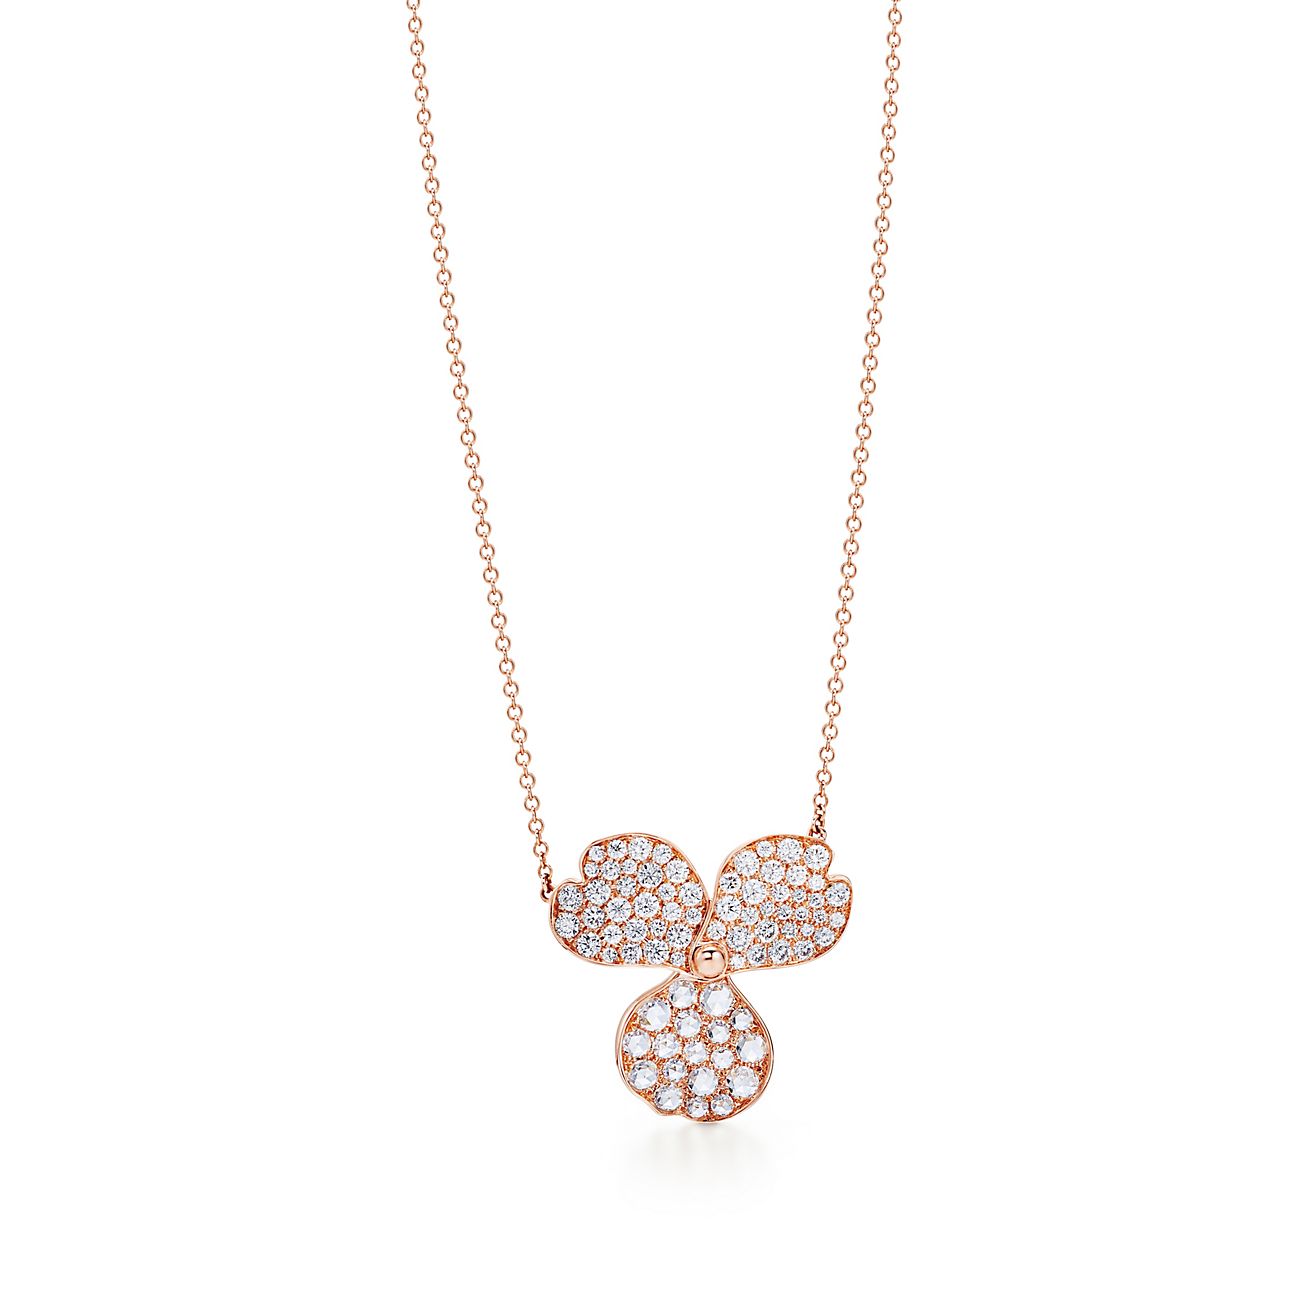 tiffany and co flower necklace